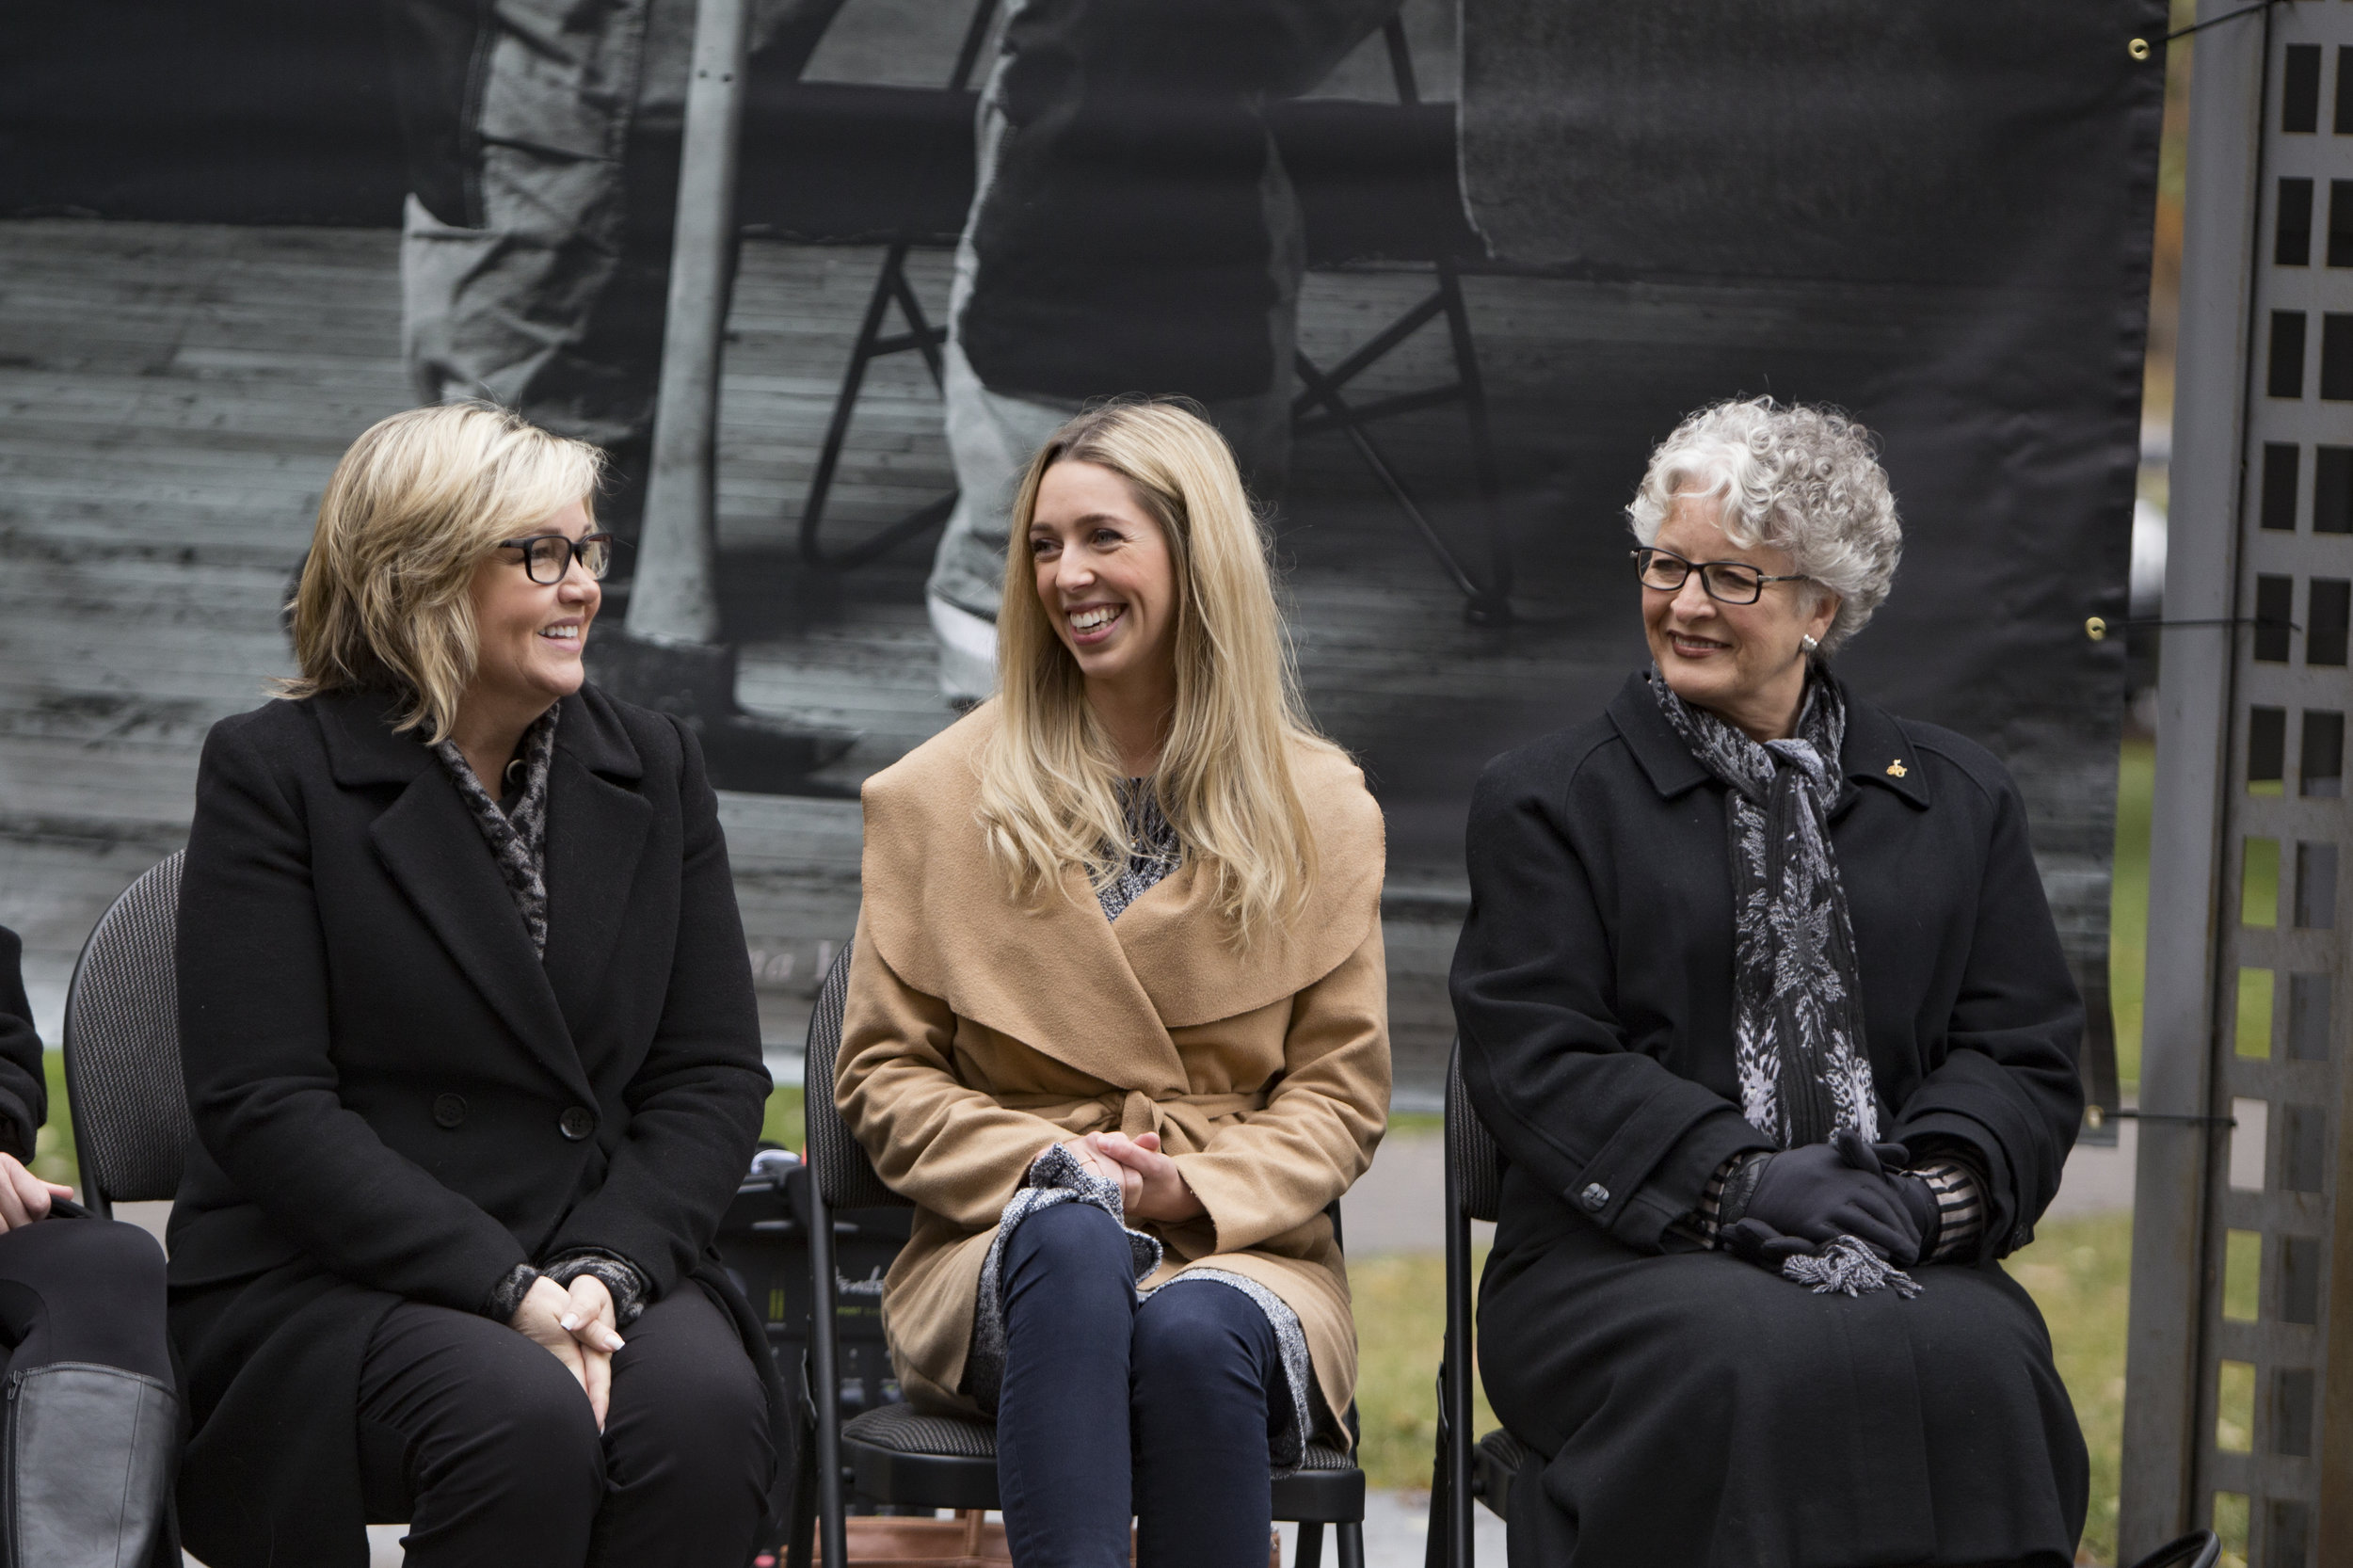  Persons Day event unveiling #WomenBelong campaign at Olympic Plaza in Calgary on Oct 18, 2016 